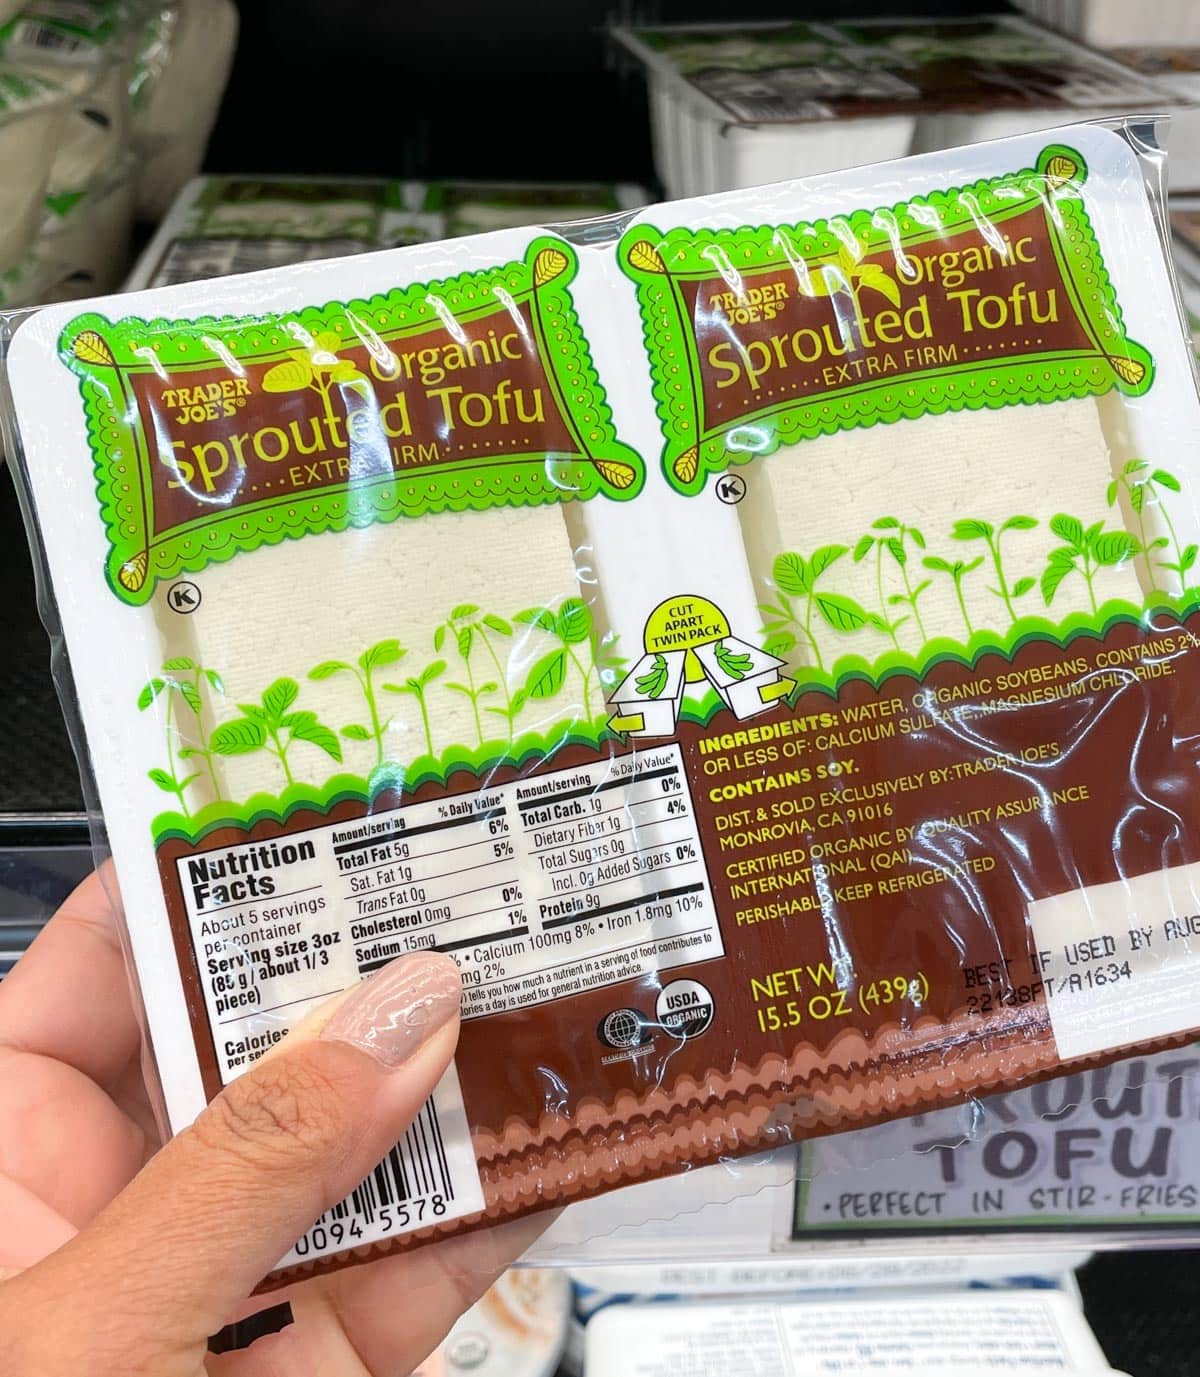 Sprouted tofu from trader joes 